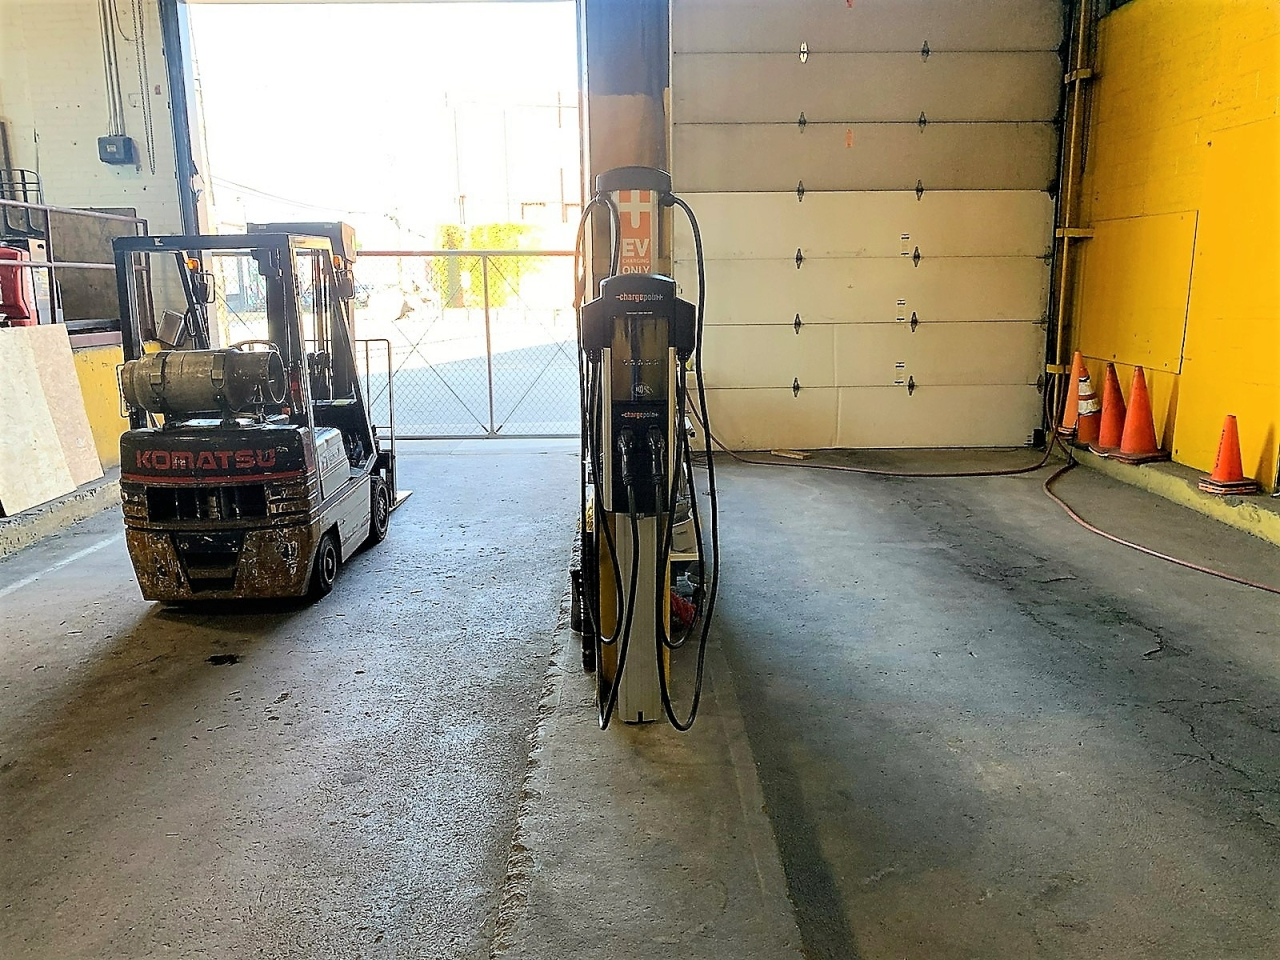 EV charger hanging in a warehouse with one garage door open behind it